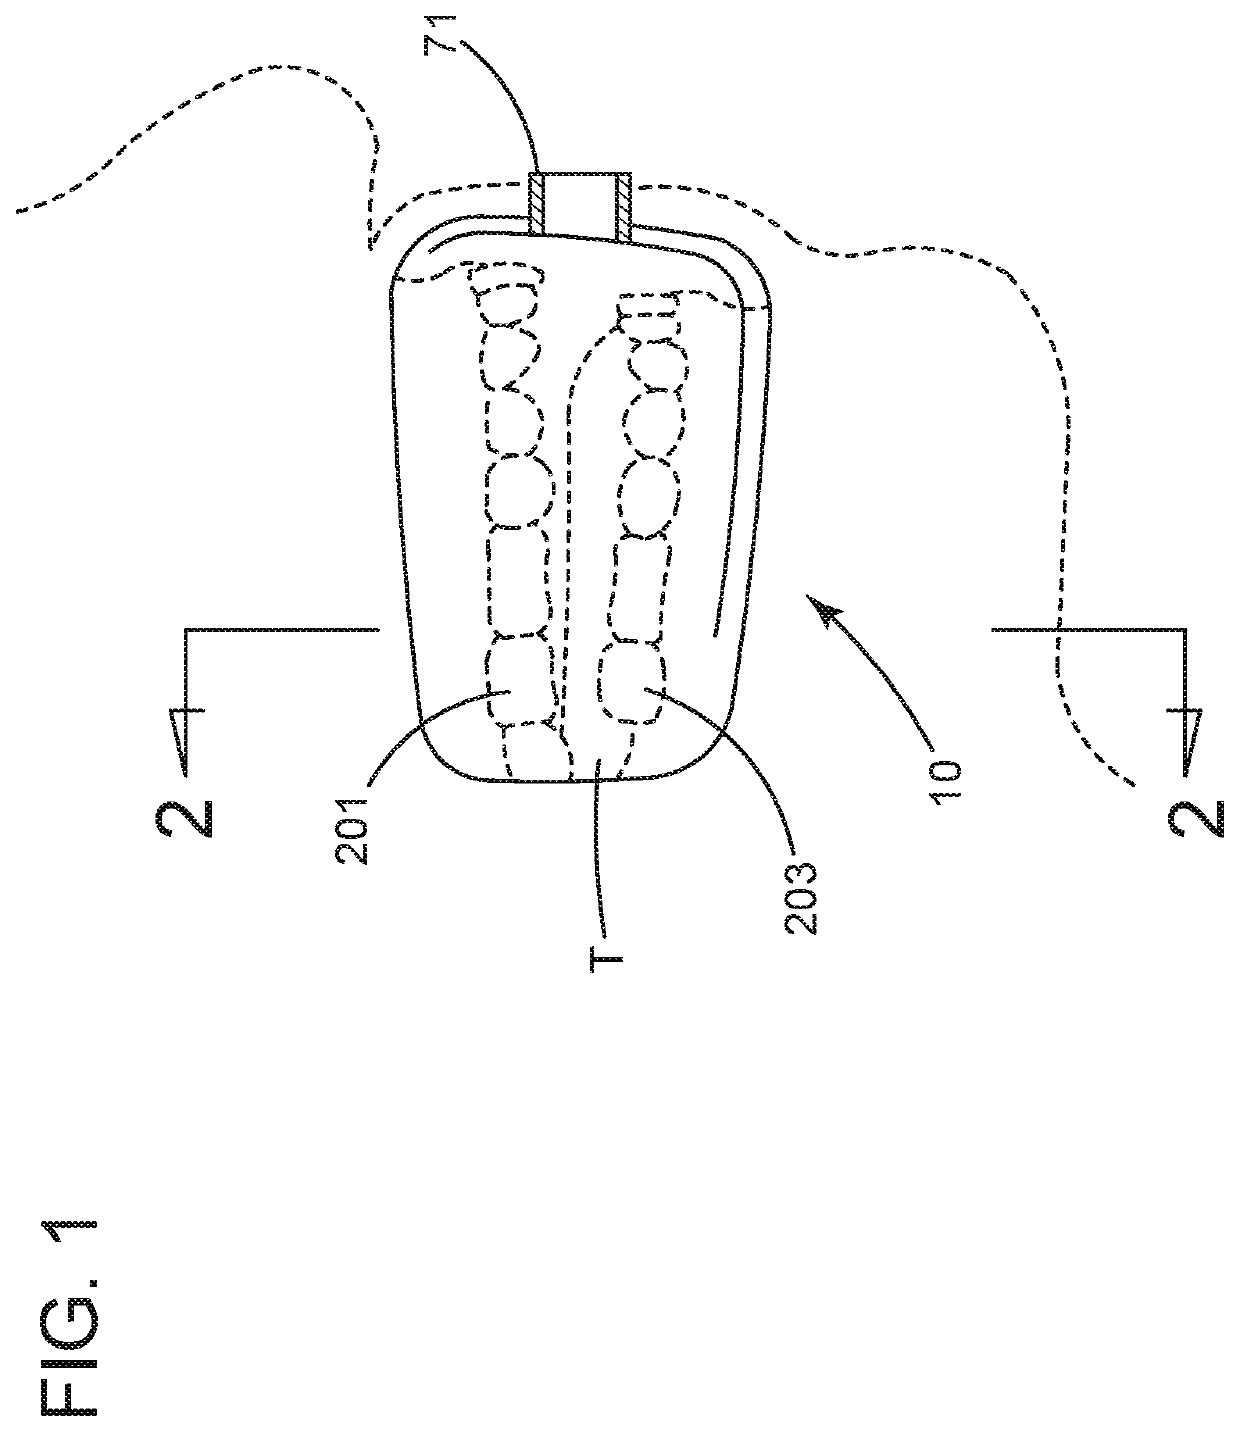 Mouth piece for cooling of oral tissue of a patient during chemotherapy treatment